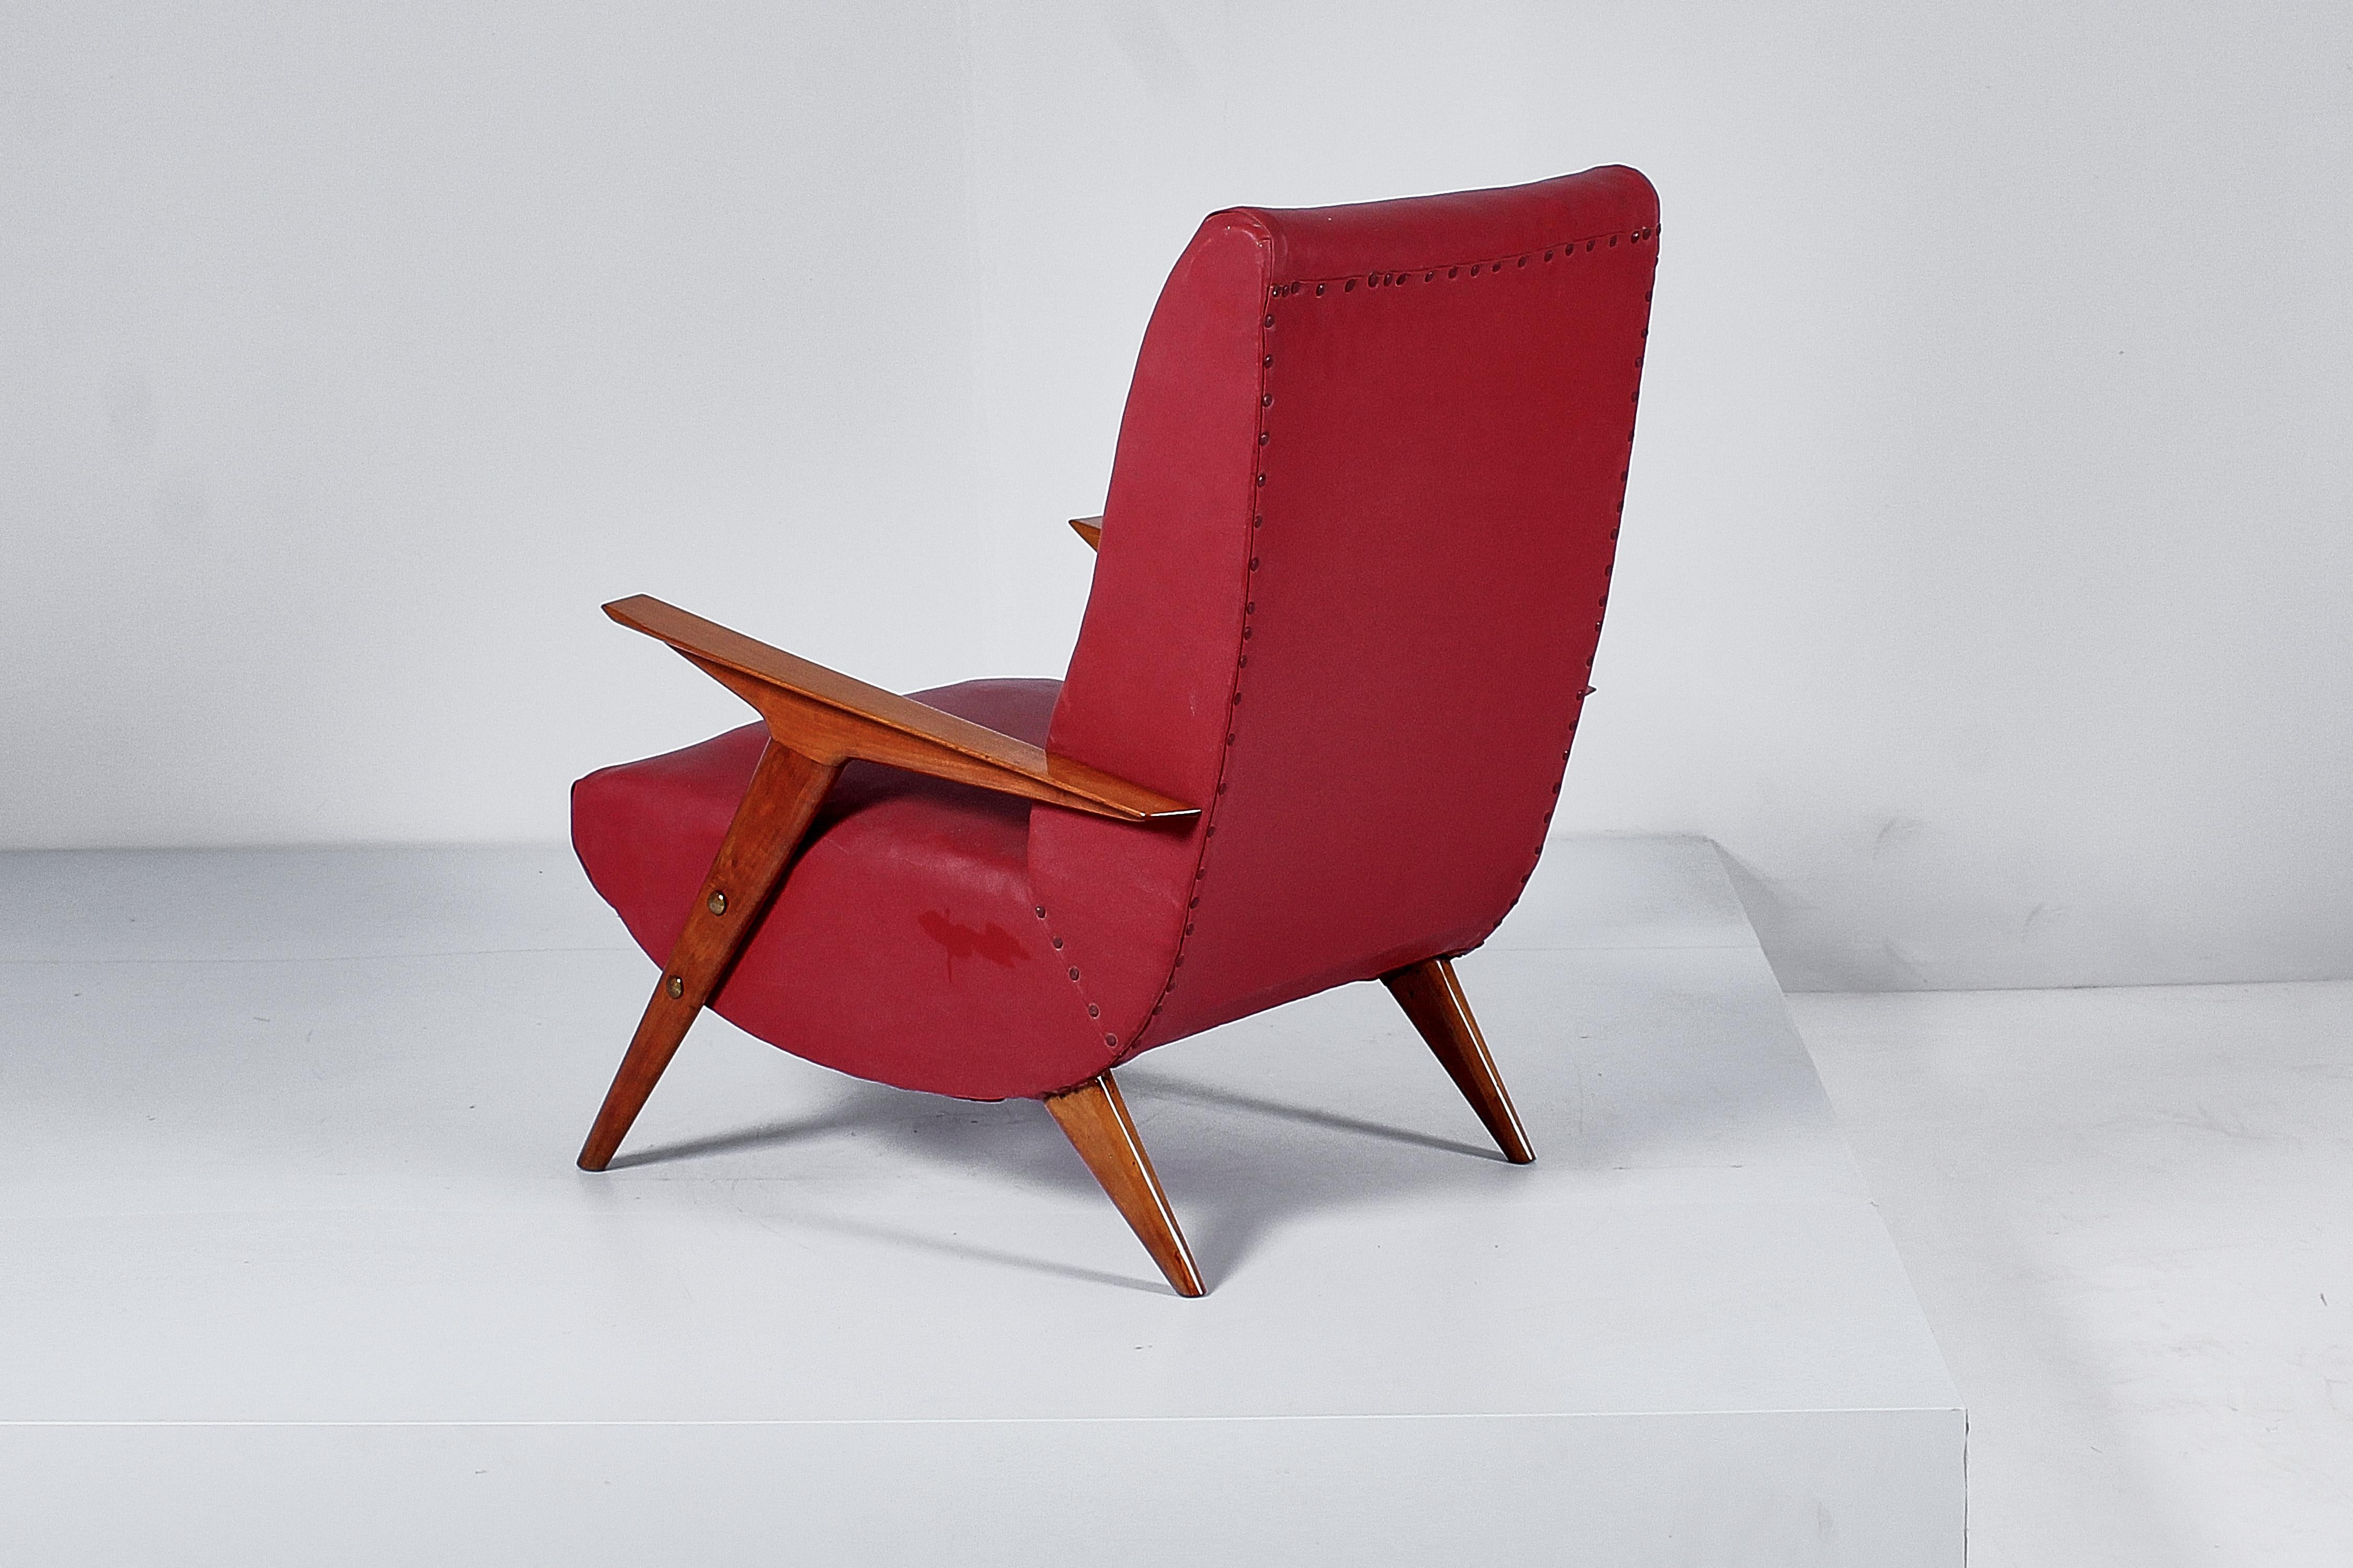 Mid-20th Century Mid-Century C. Graffi (attr.) Shaped Wood and Red Leather Armchair 50s Italy  For Sale